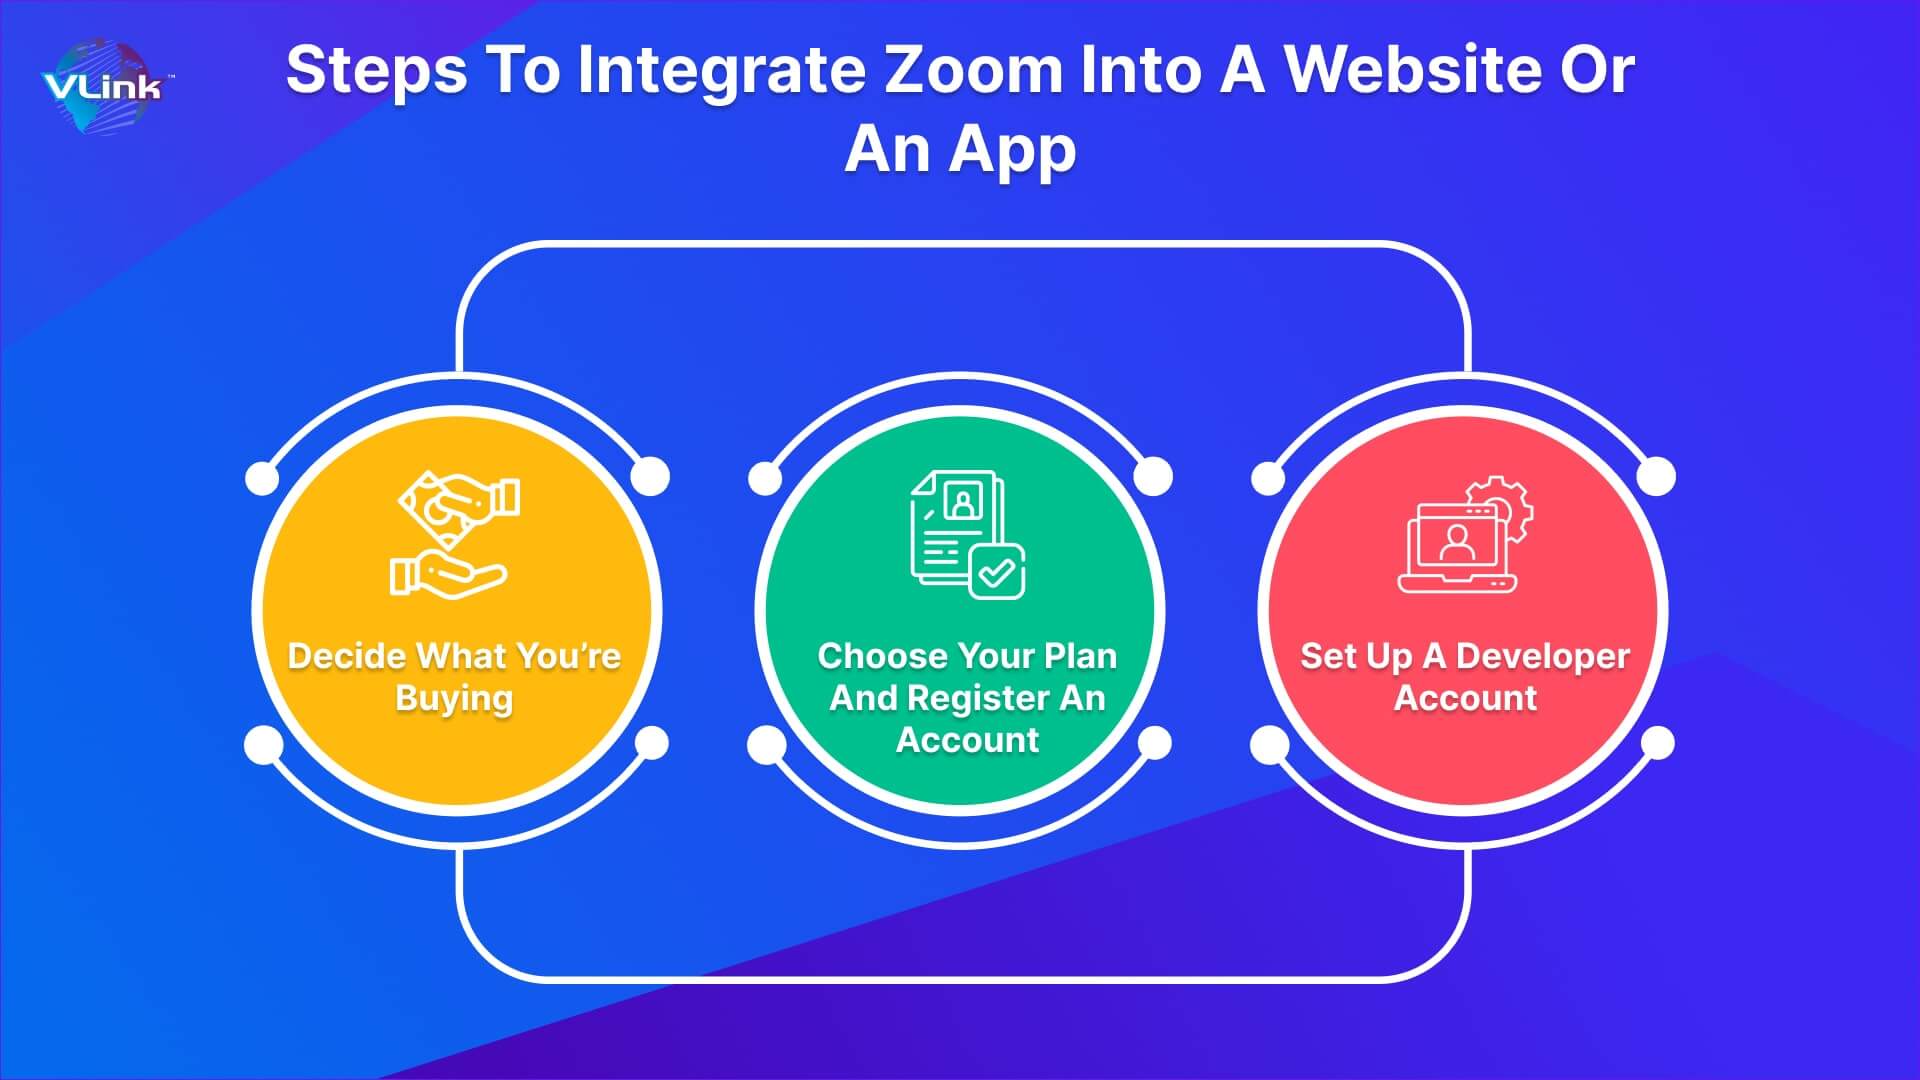 Steps to integrate zoom into a website or an app